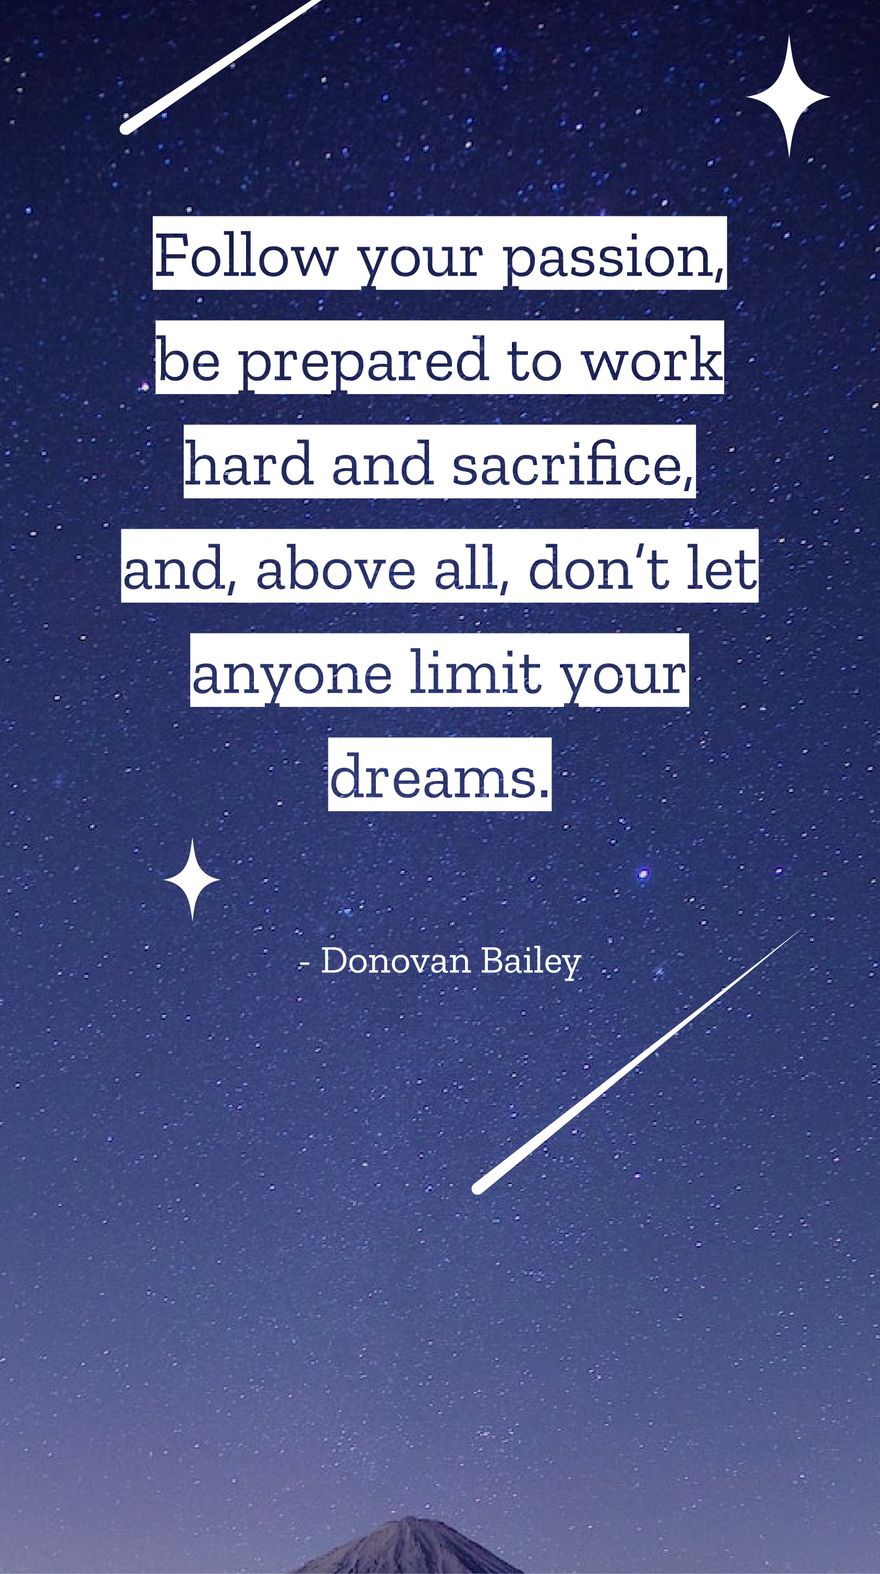 Donovan Bailey - Follow your passion, be prepared to work hard and sacrifice, and, above all, don’t let anyone limit your dreams.